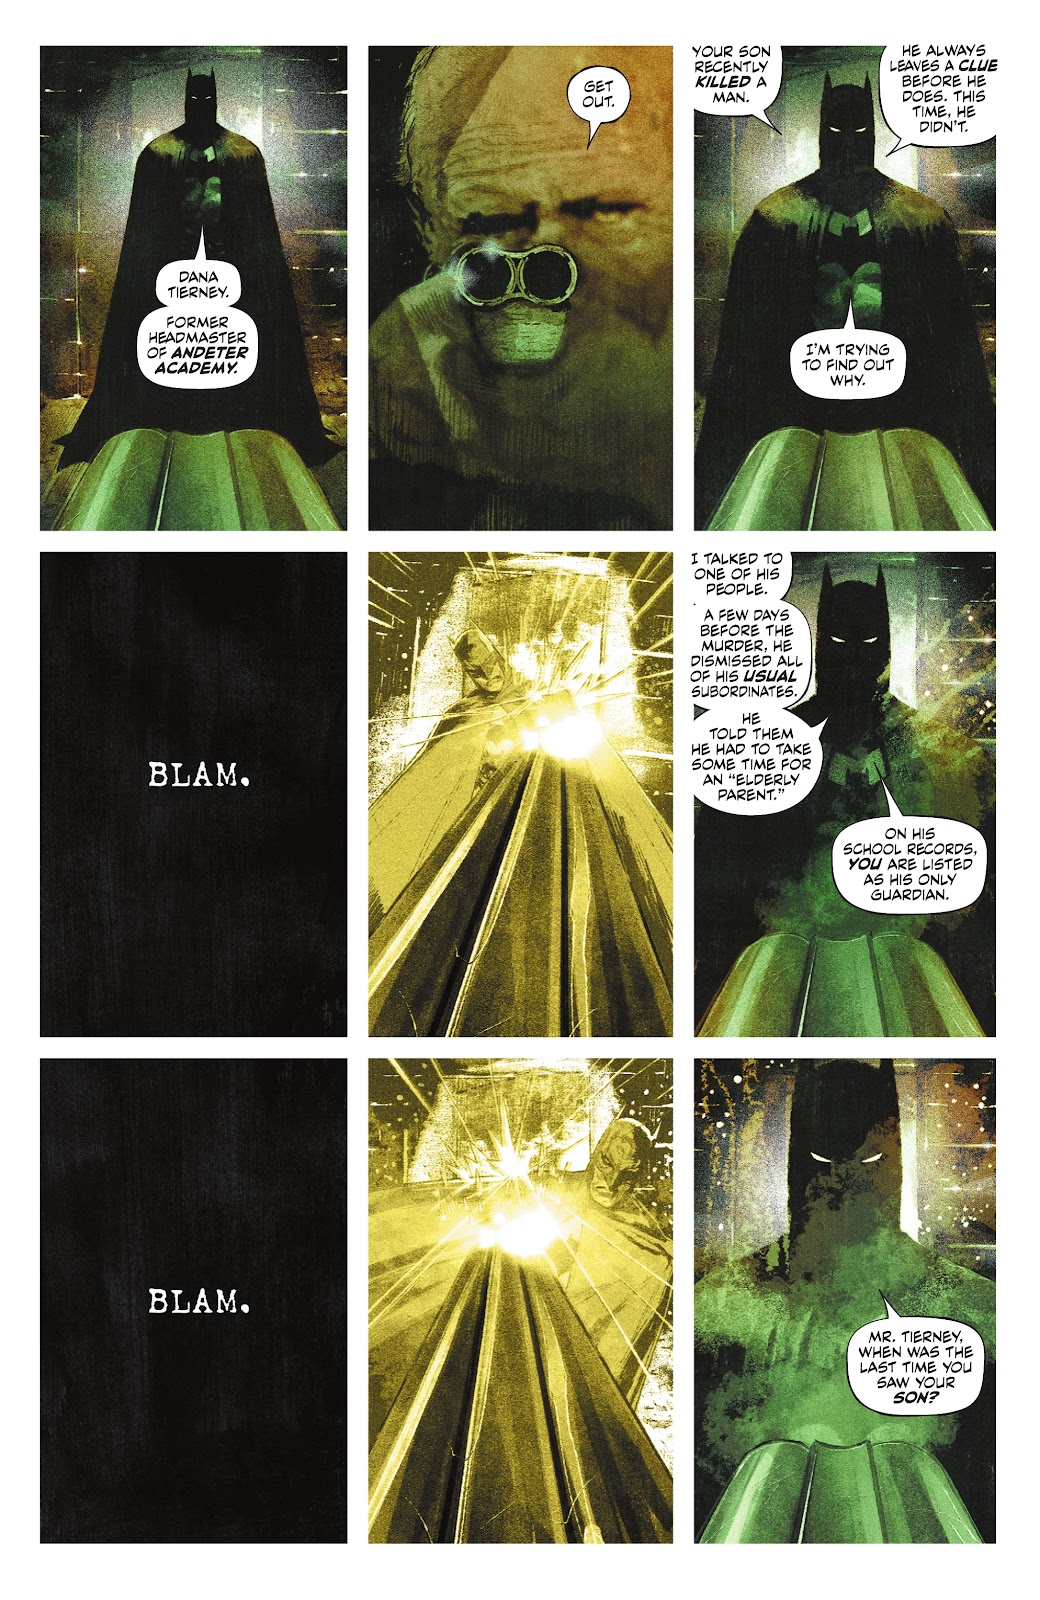 Batman: One Bad Day - The Riddler issue 1 - Page 32